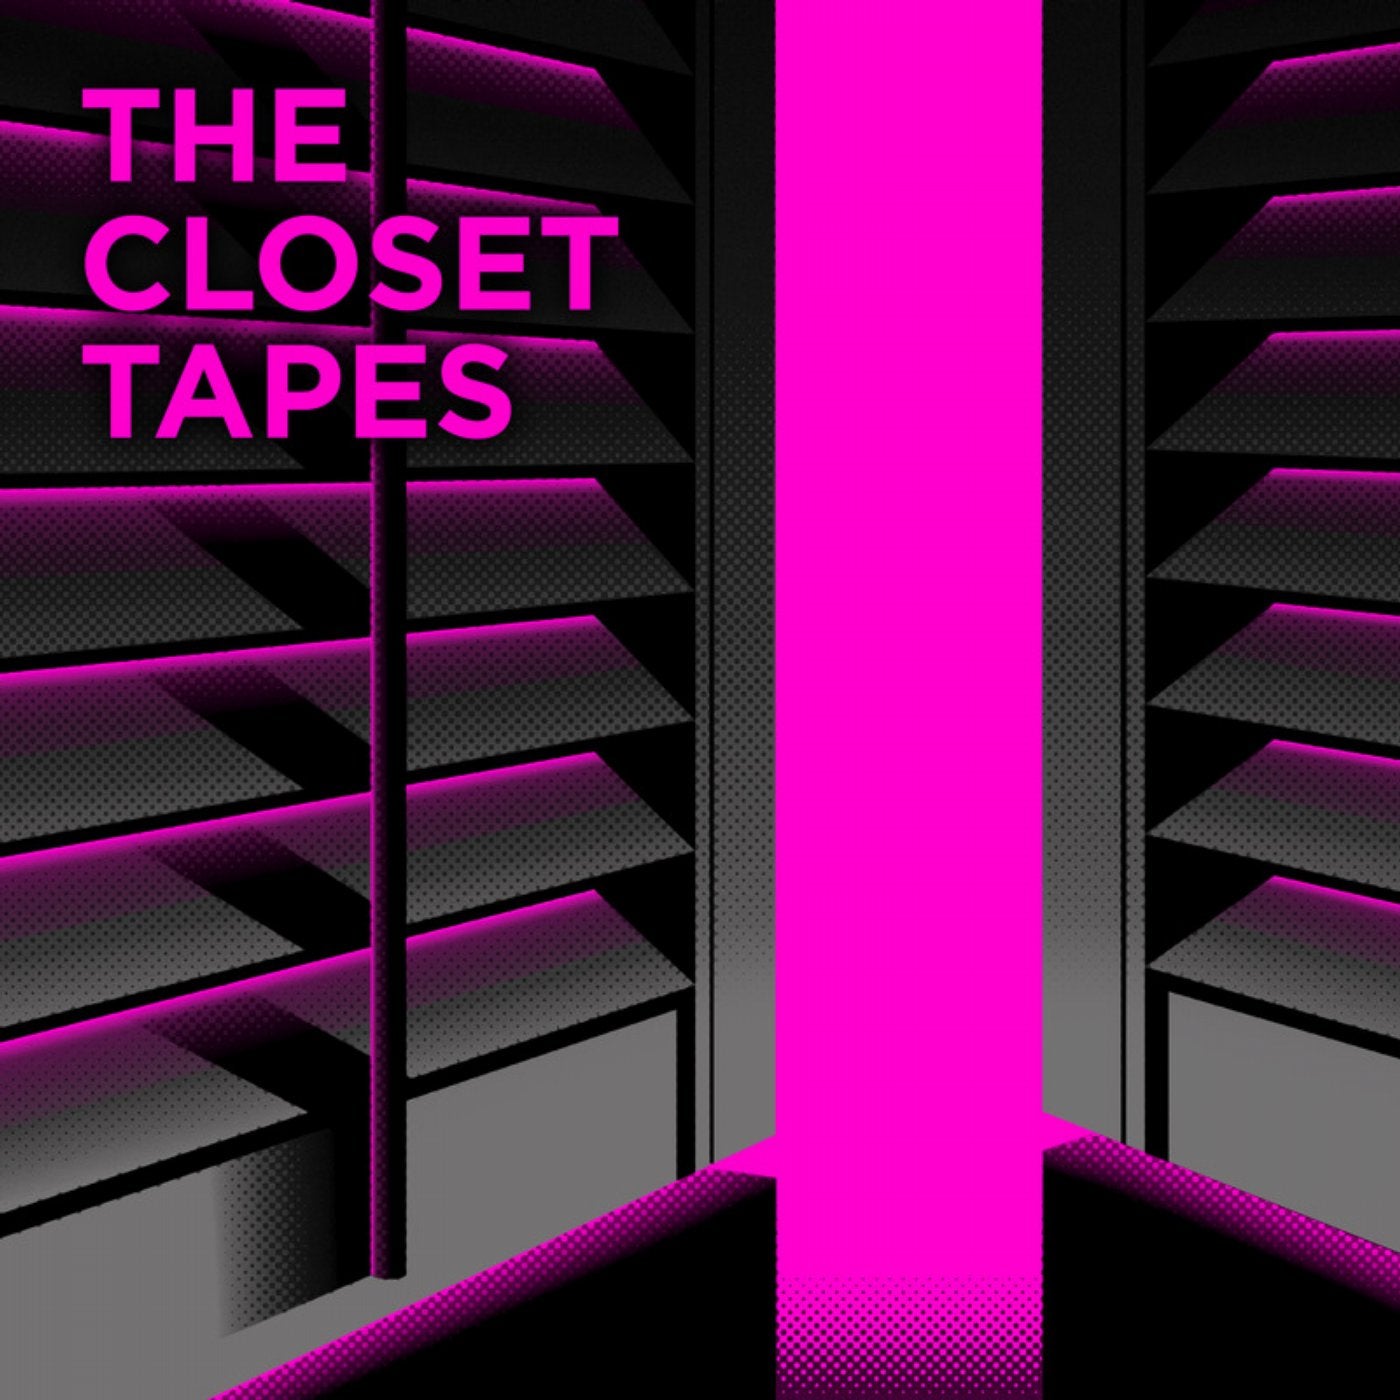 The Closet Tapes